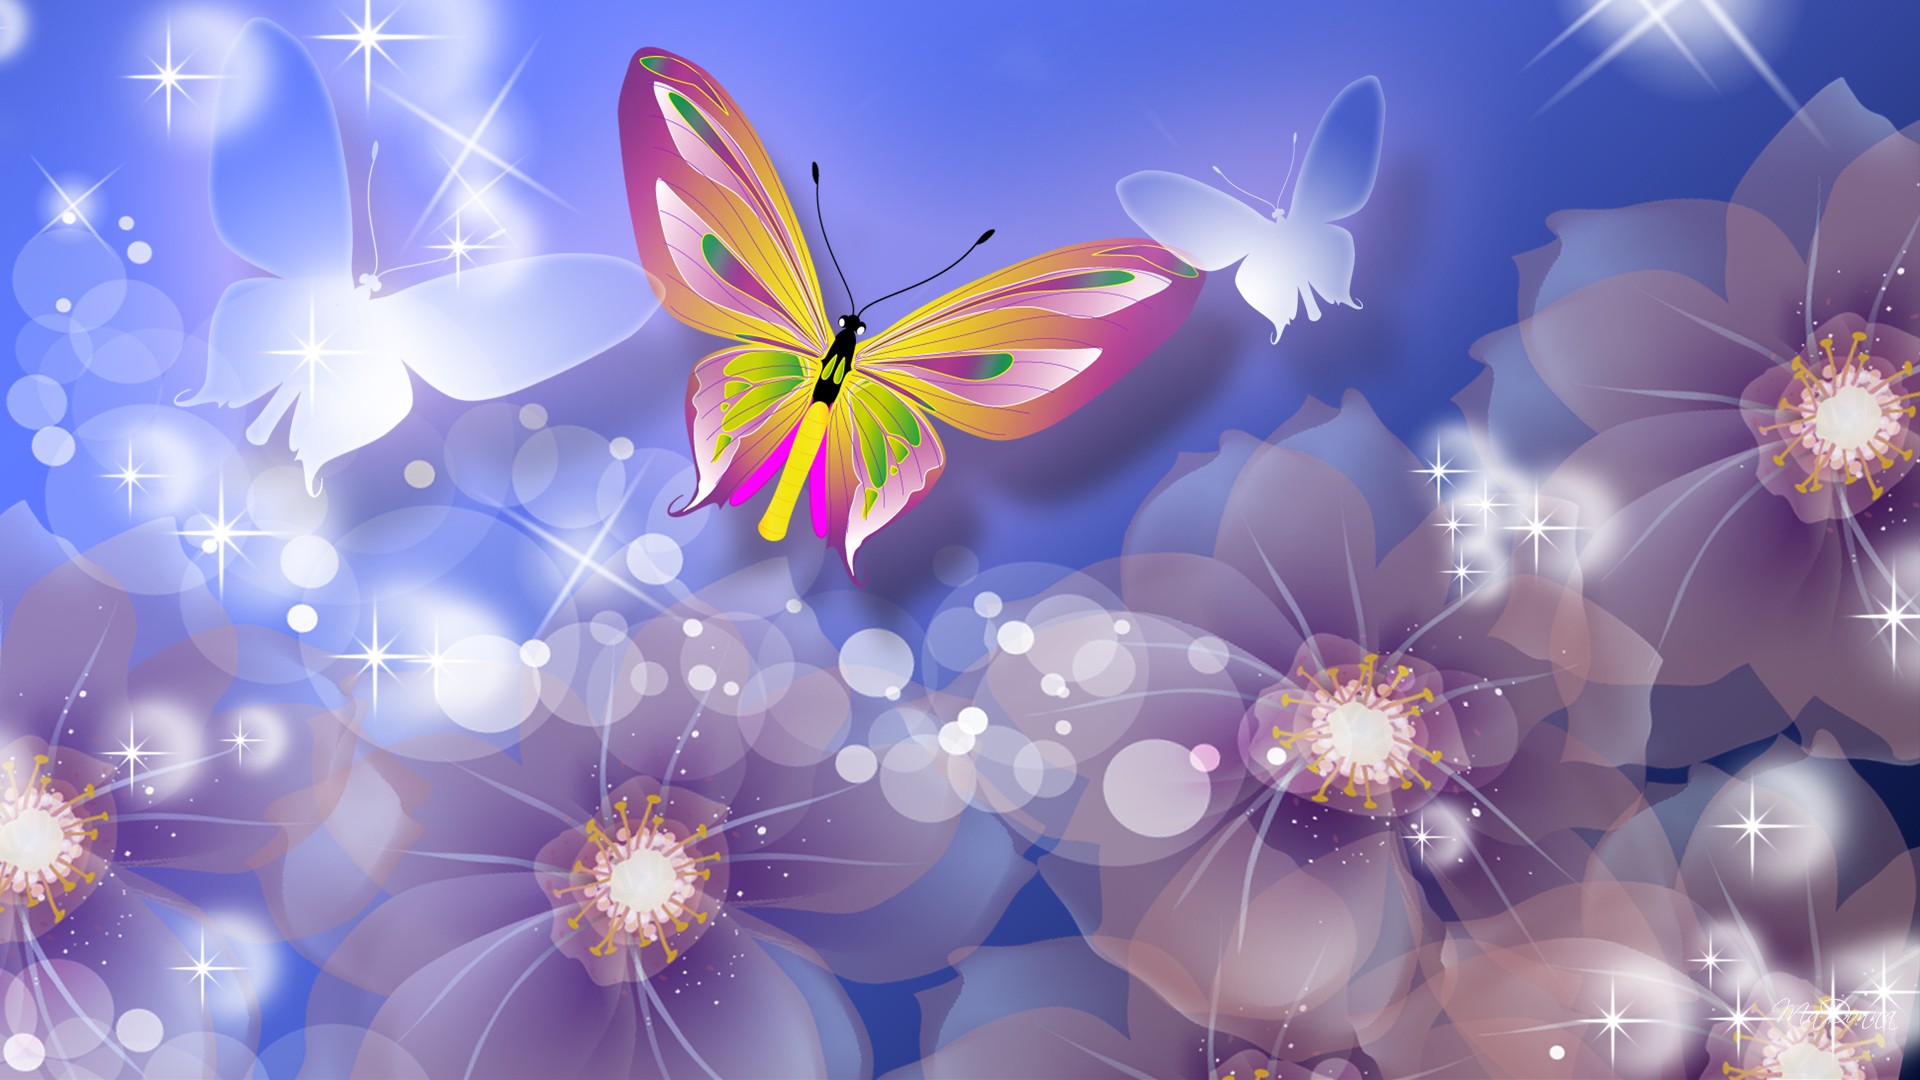 glowing live wallpaper,butterfly,insect,purple,moths and butterflies,lilac